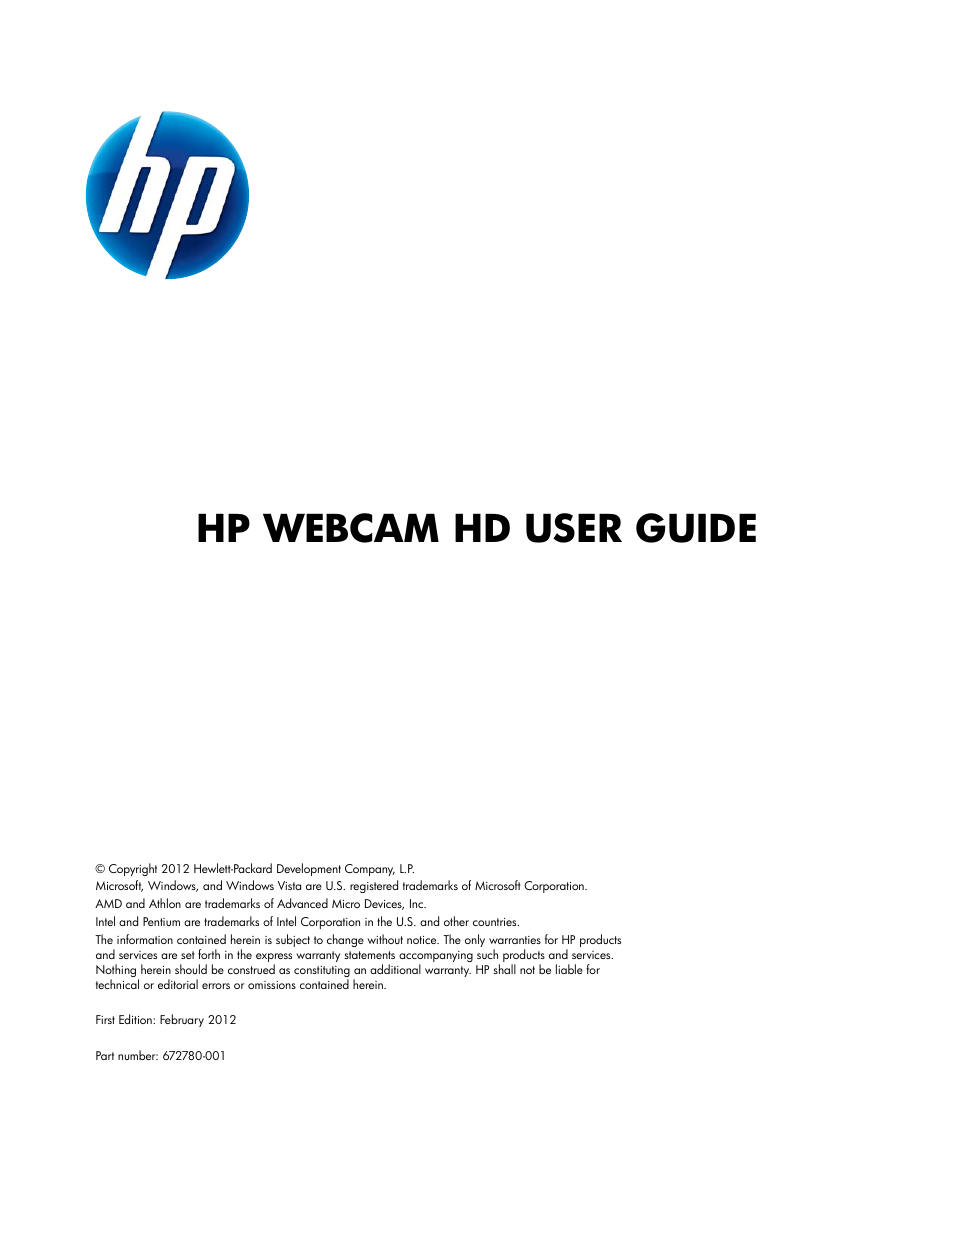 HP HD 2300 User | pages